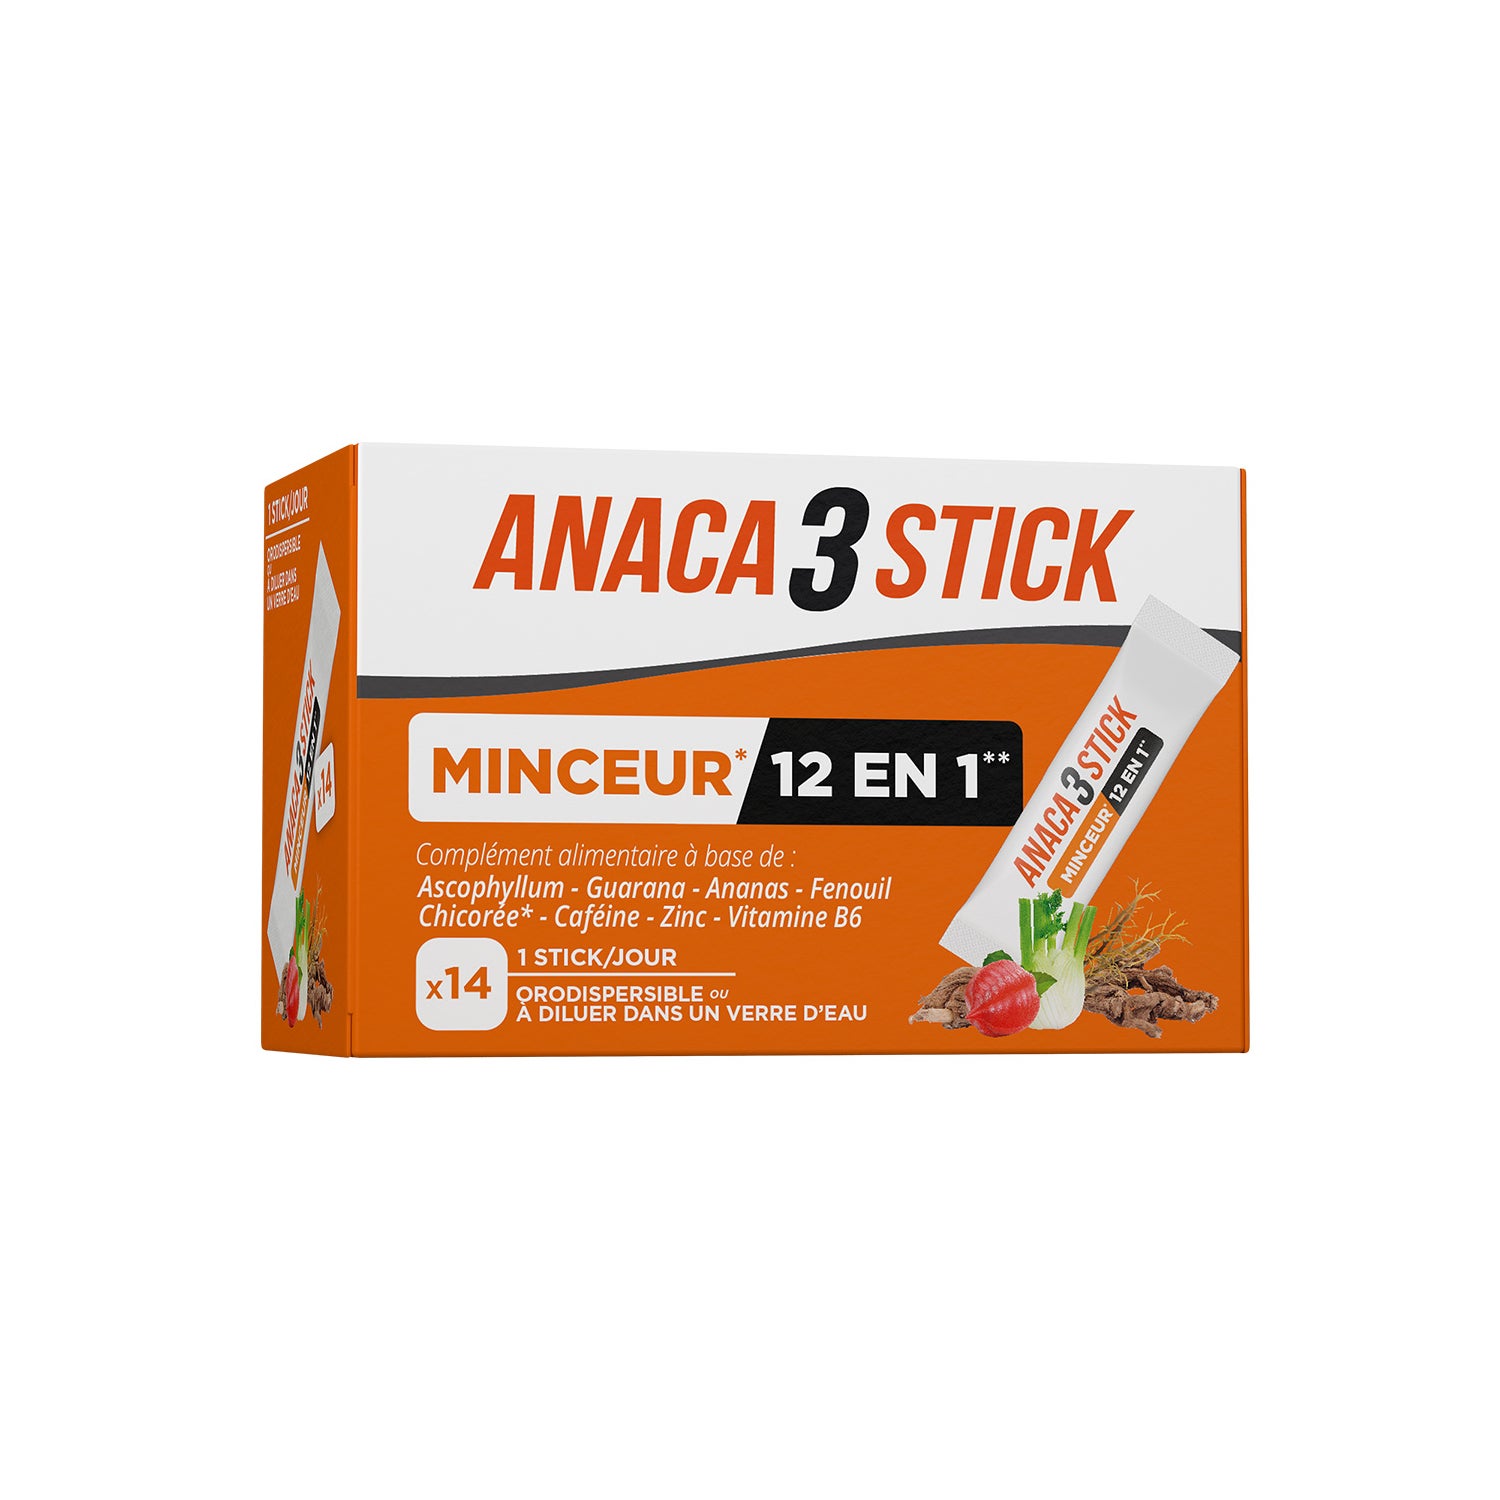 Anaca3 Infusion Minceur Nuit 